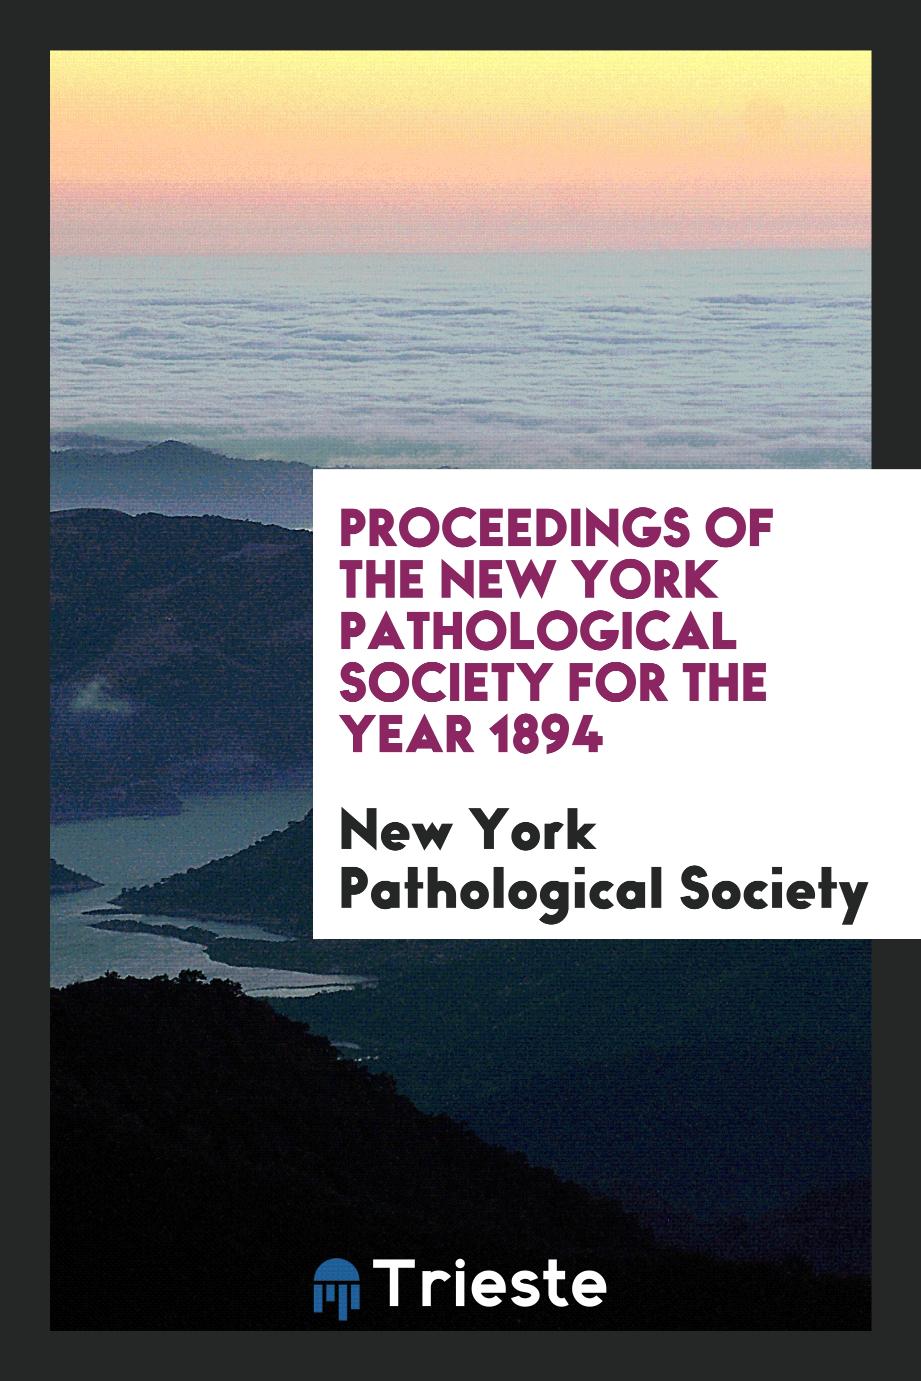 Proceedings of the New York Pathological Society for the Year 1894